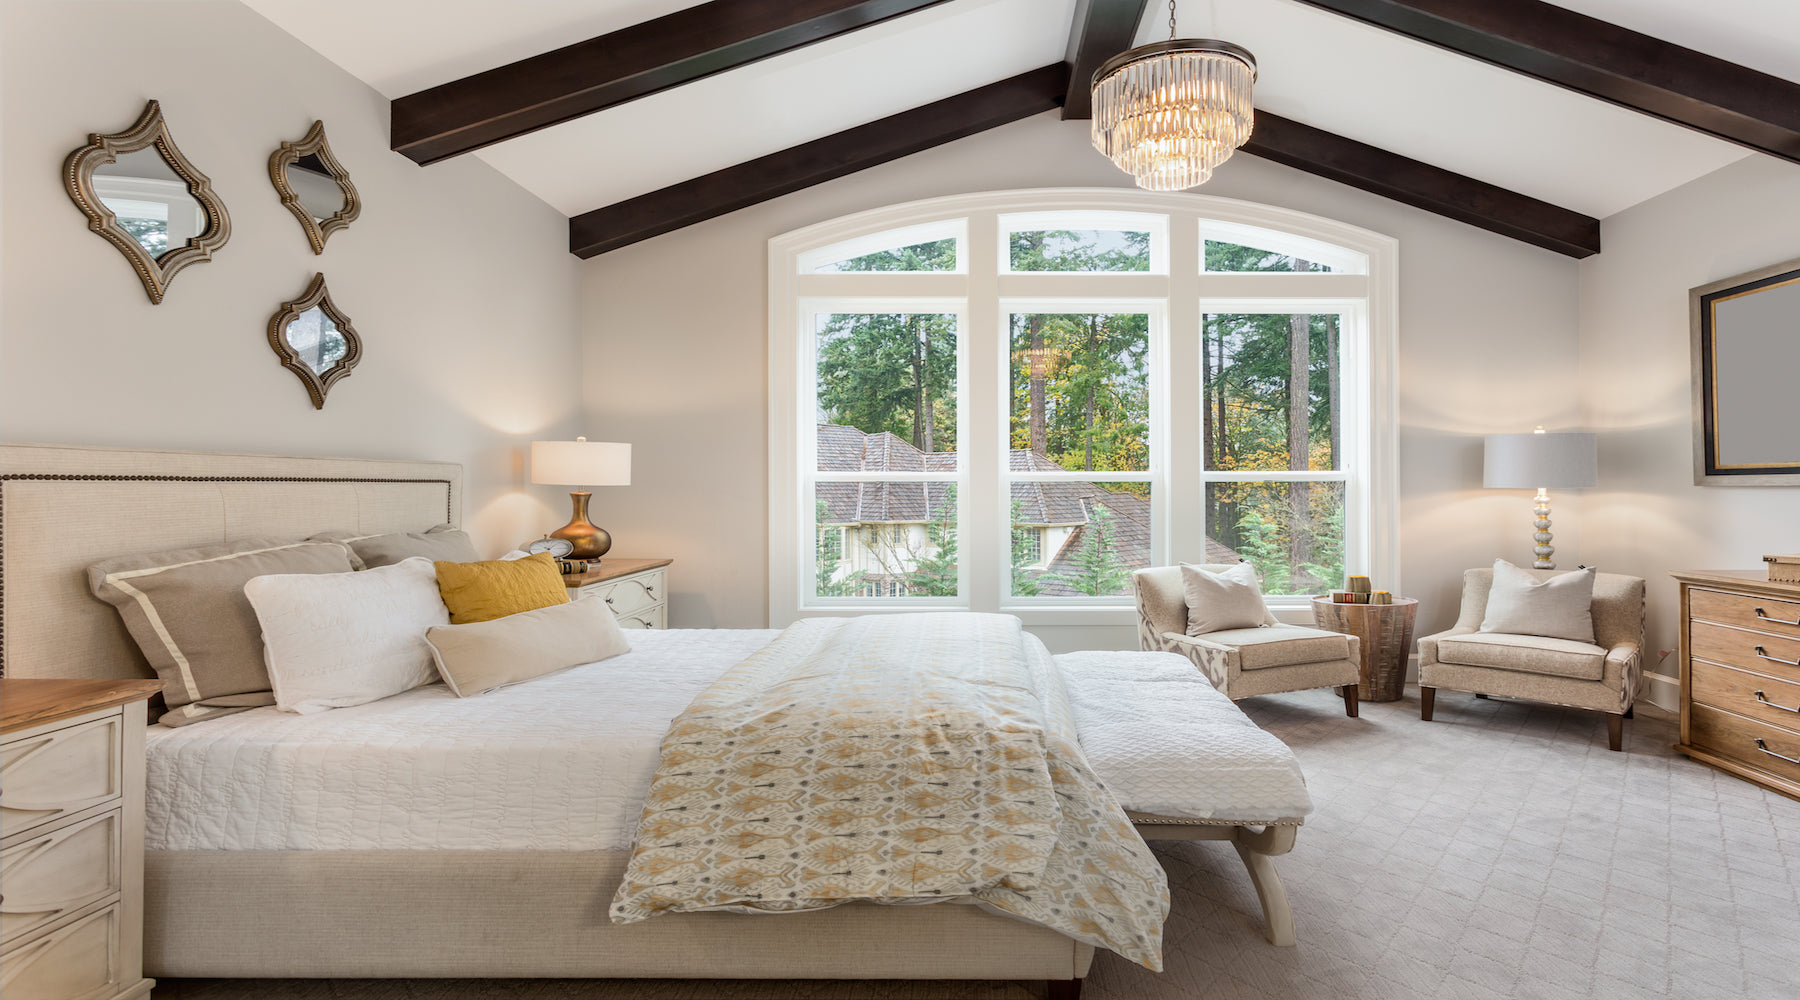 Bedroom lighting installed in large master bedroom with vaulted ceilings and wooden beams